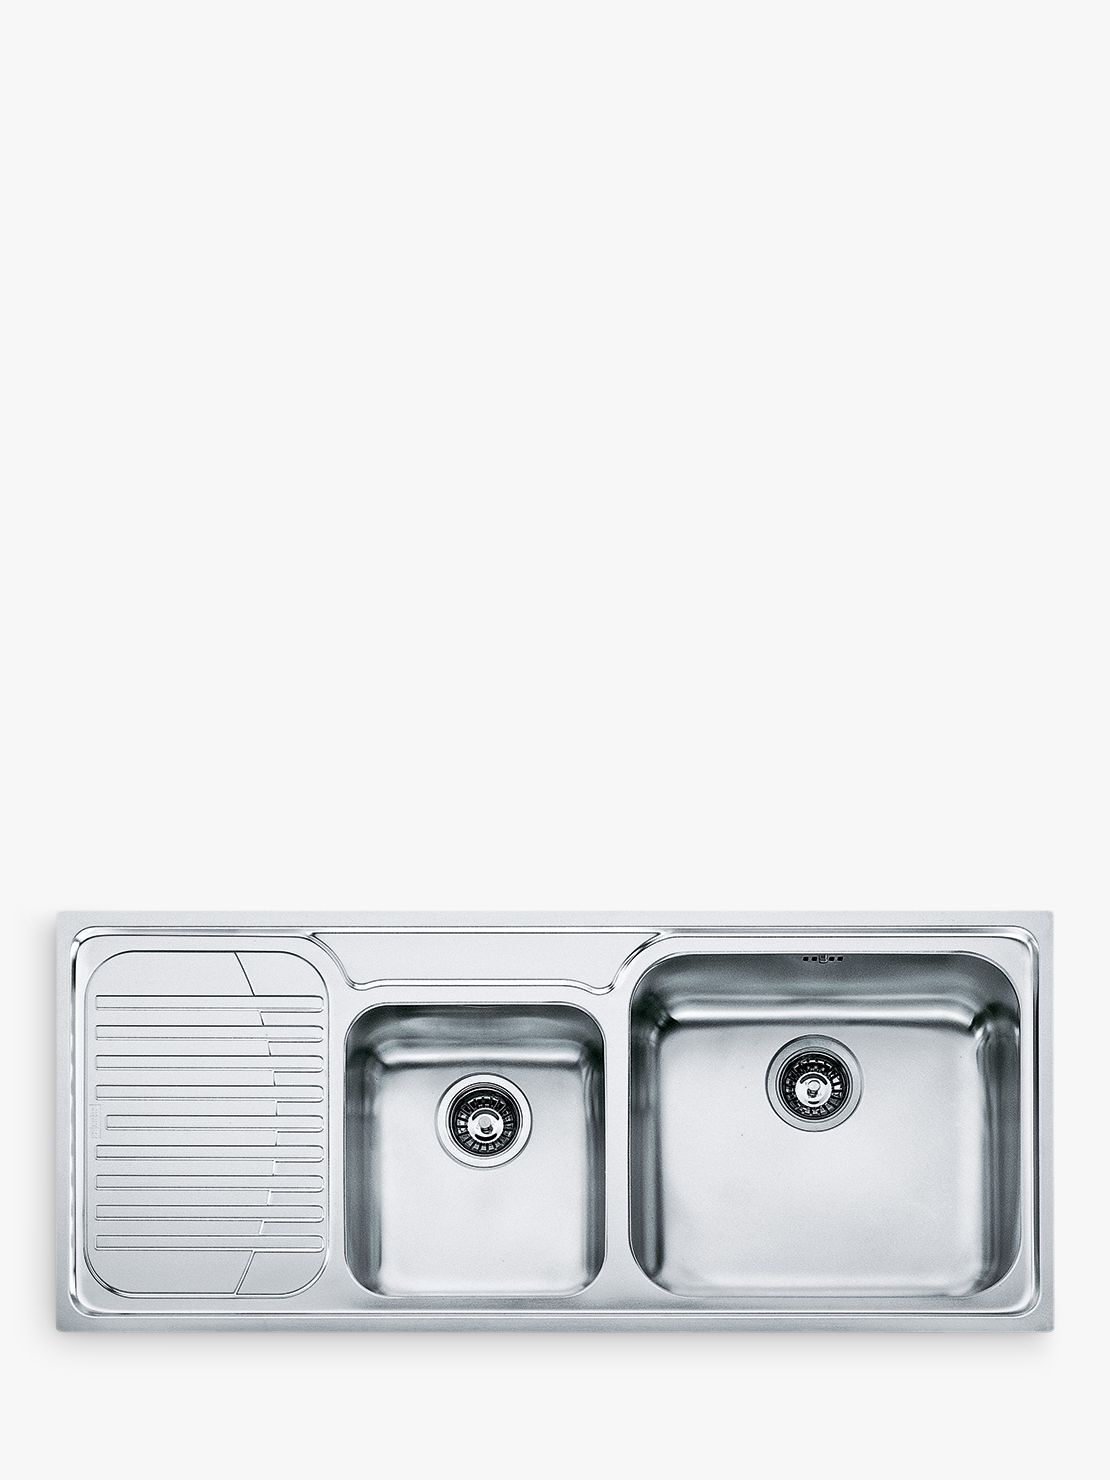 Franke Galassia Gax 621 1 75 Bowl Inset Kitchen Sink With Left Hand Bowl Stainless Steel